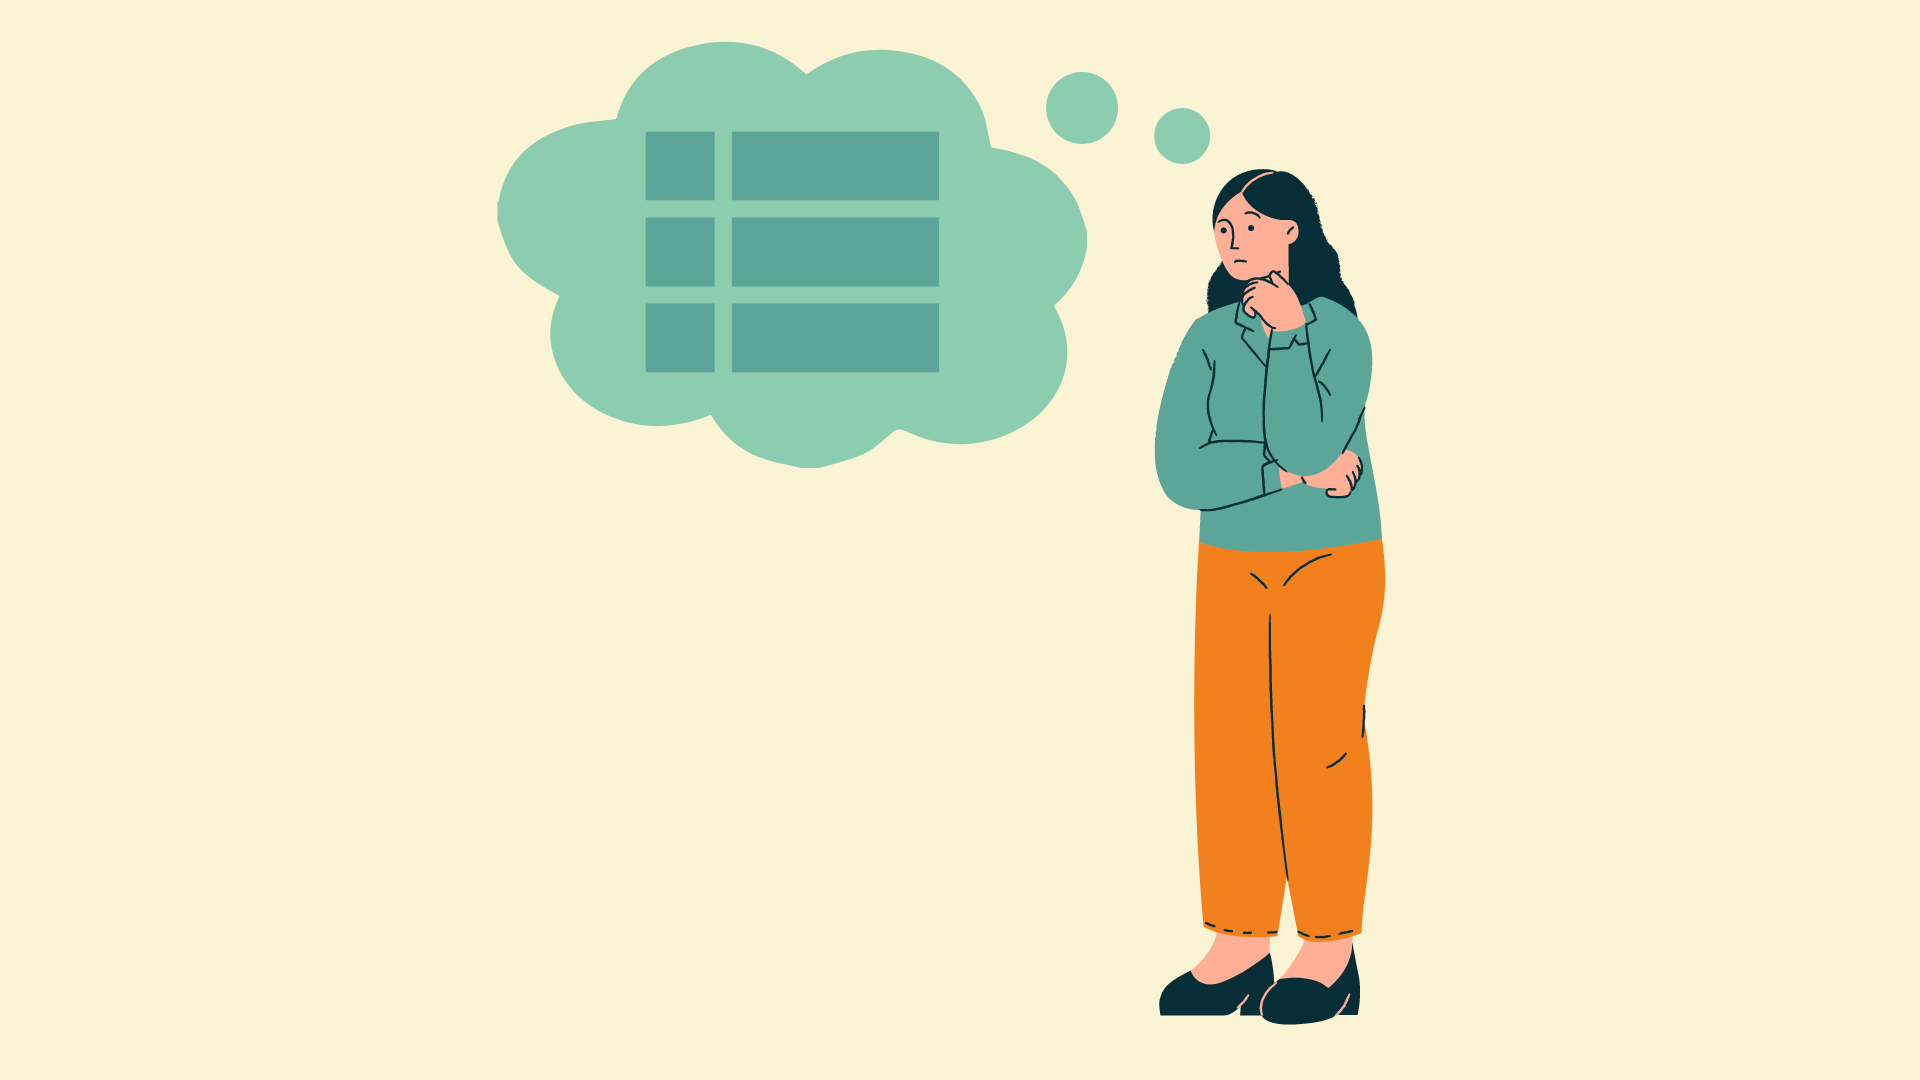 A graphic featuring a woman standing and thinking, with a thought bubble showing three separate options.